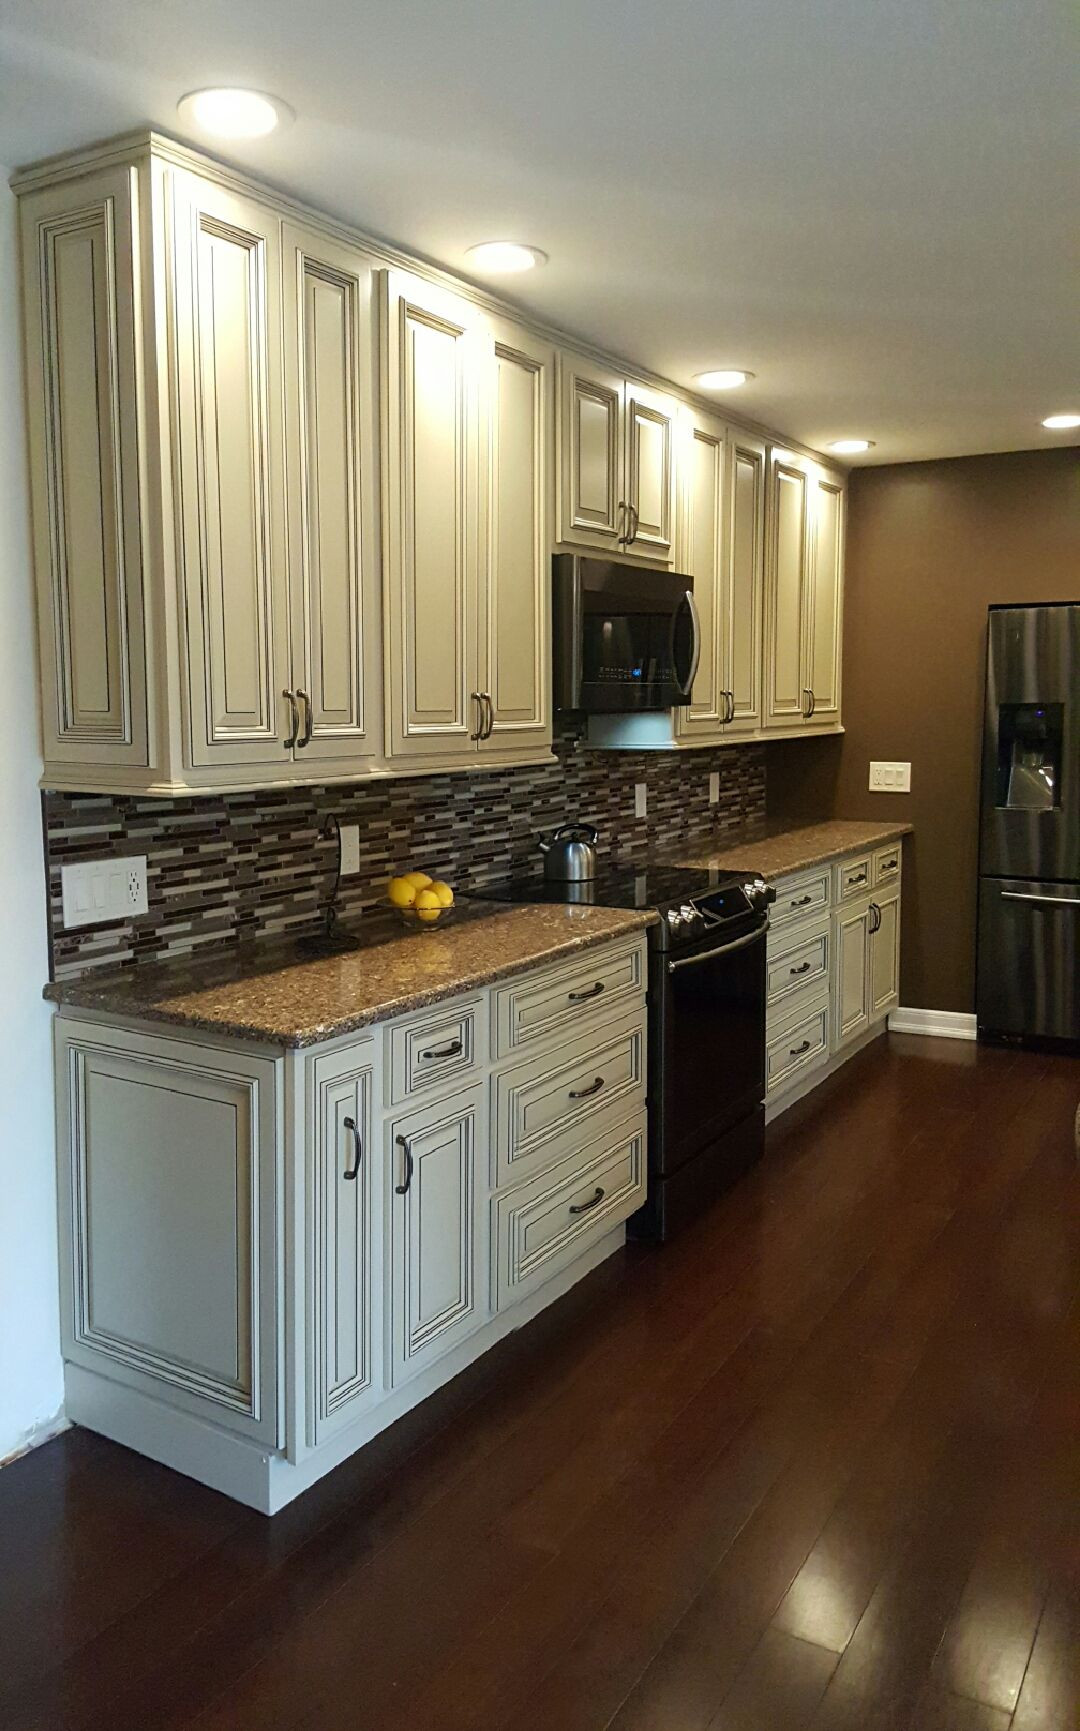 Bargain Outlet Kitchen Cabinets
 Kitchen renovation by Susan M of Rochester NY Replaced